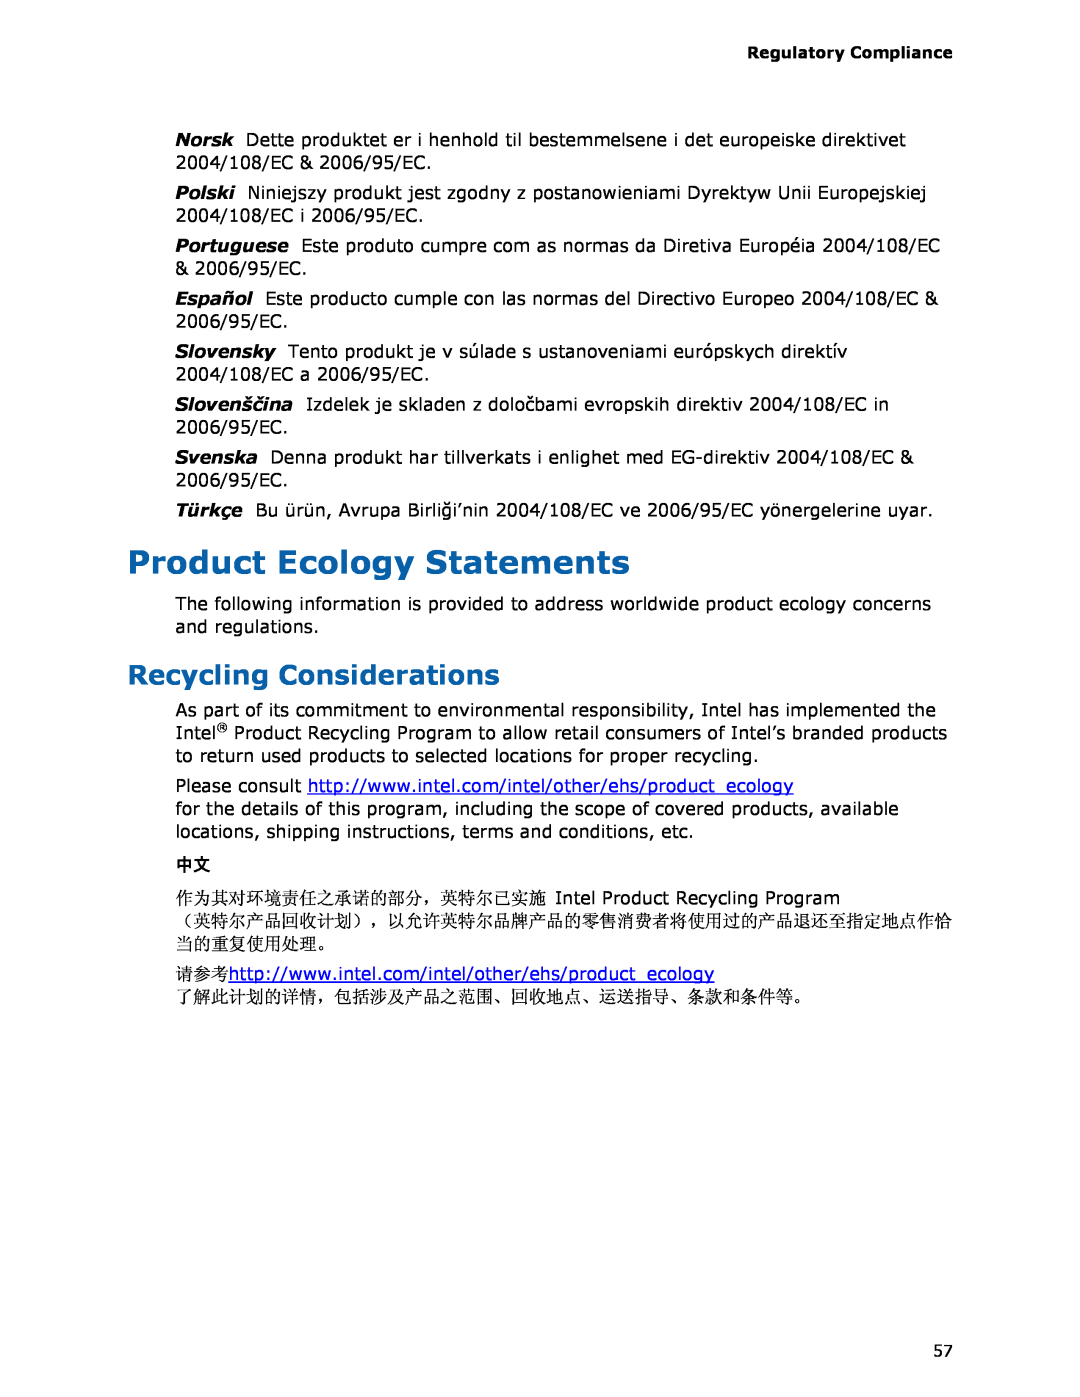 Intel D510MO manual Product Ecology Statements, Recycling Considerations 